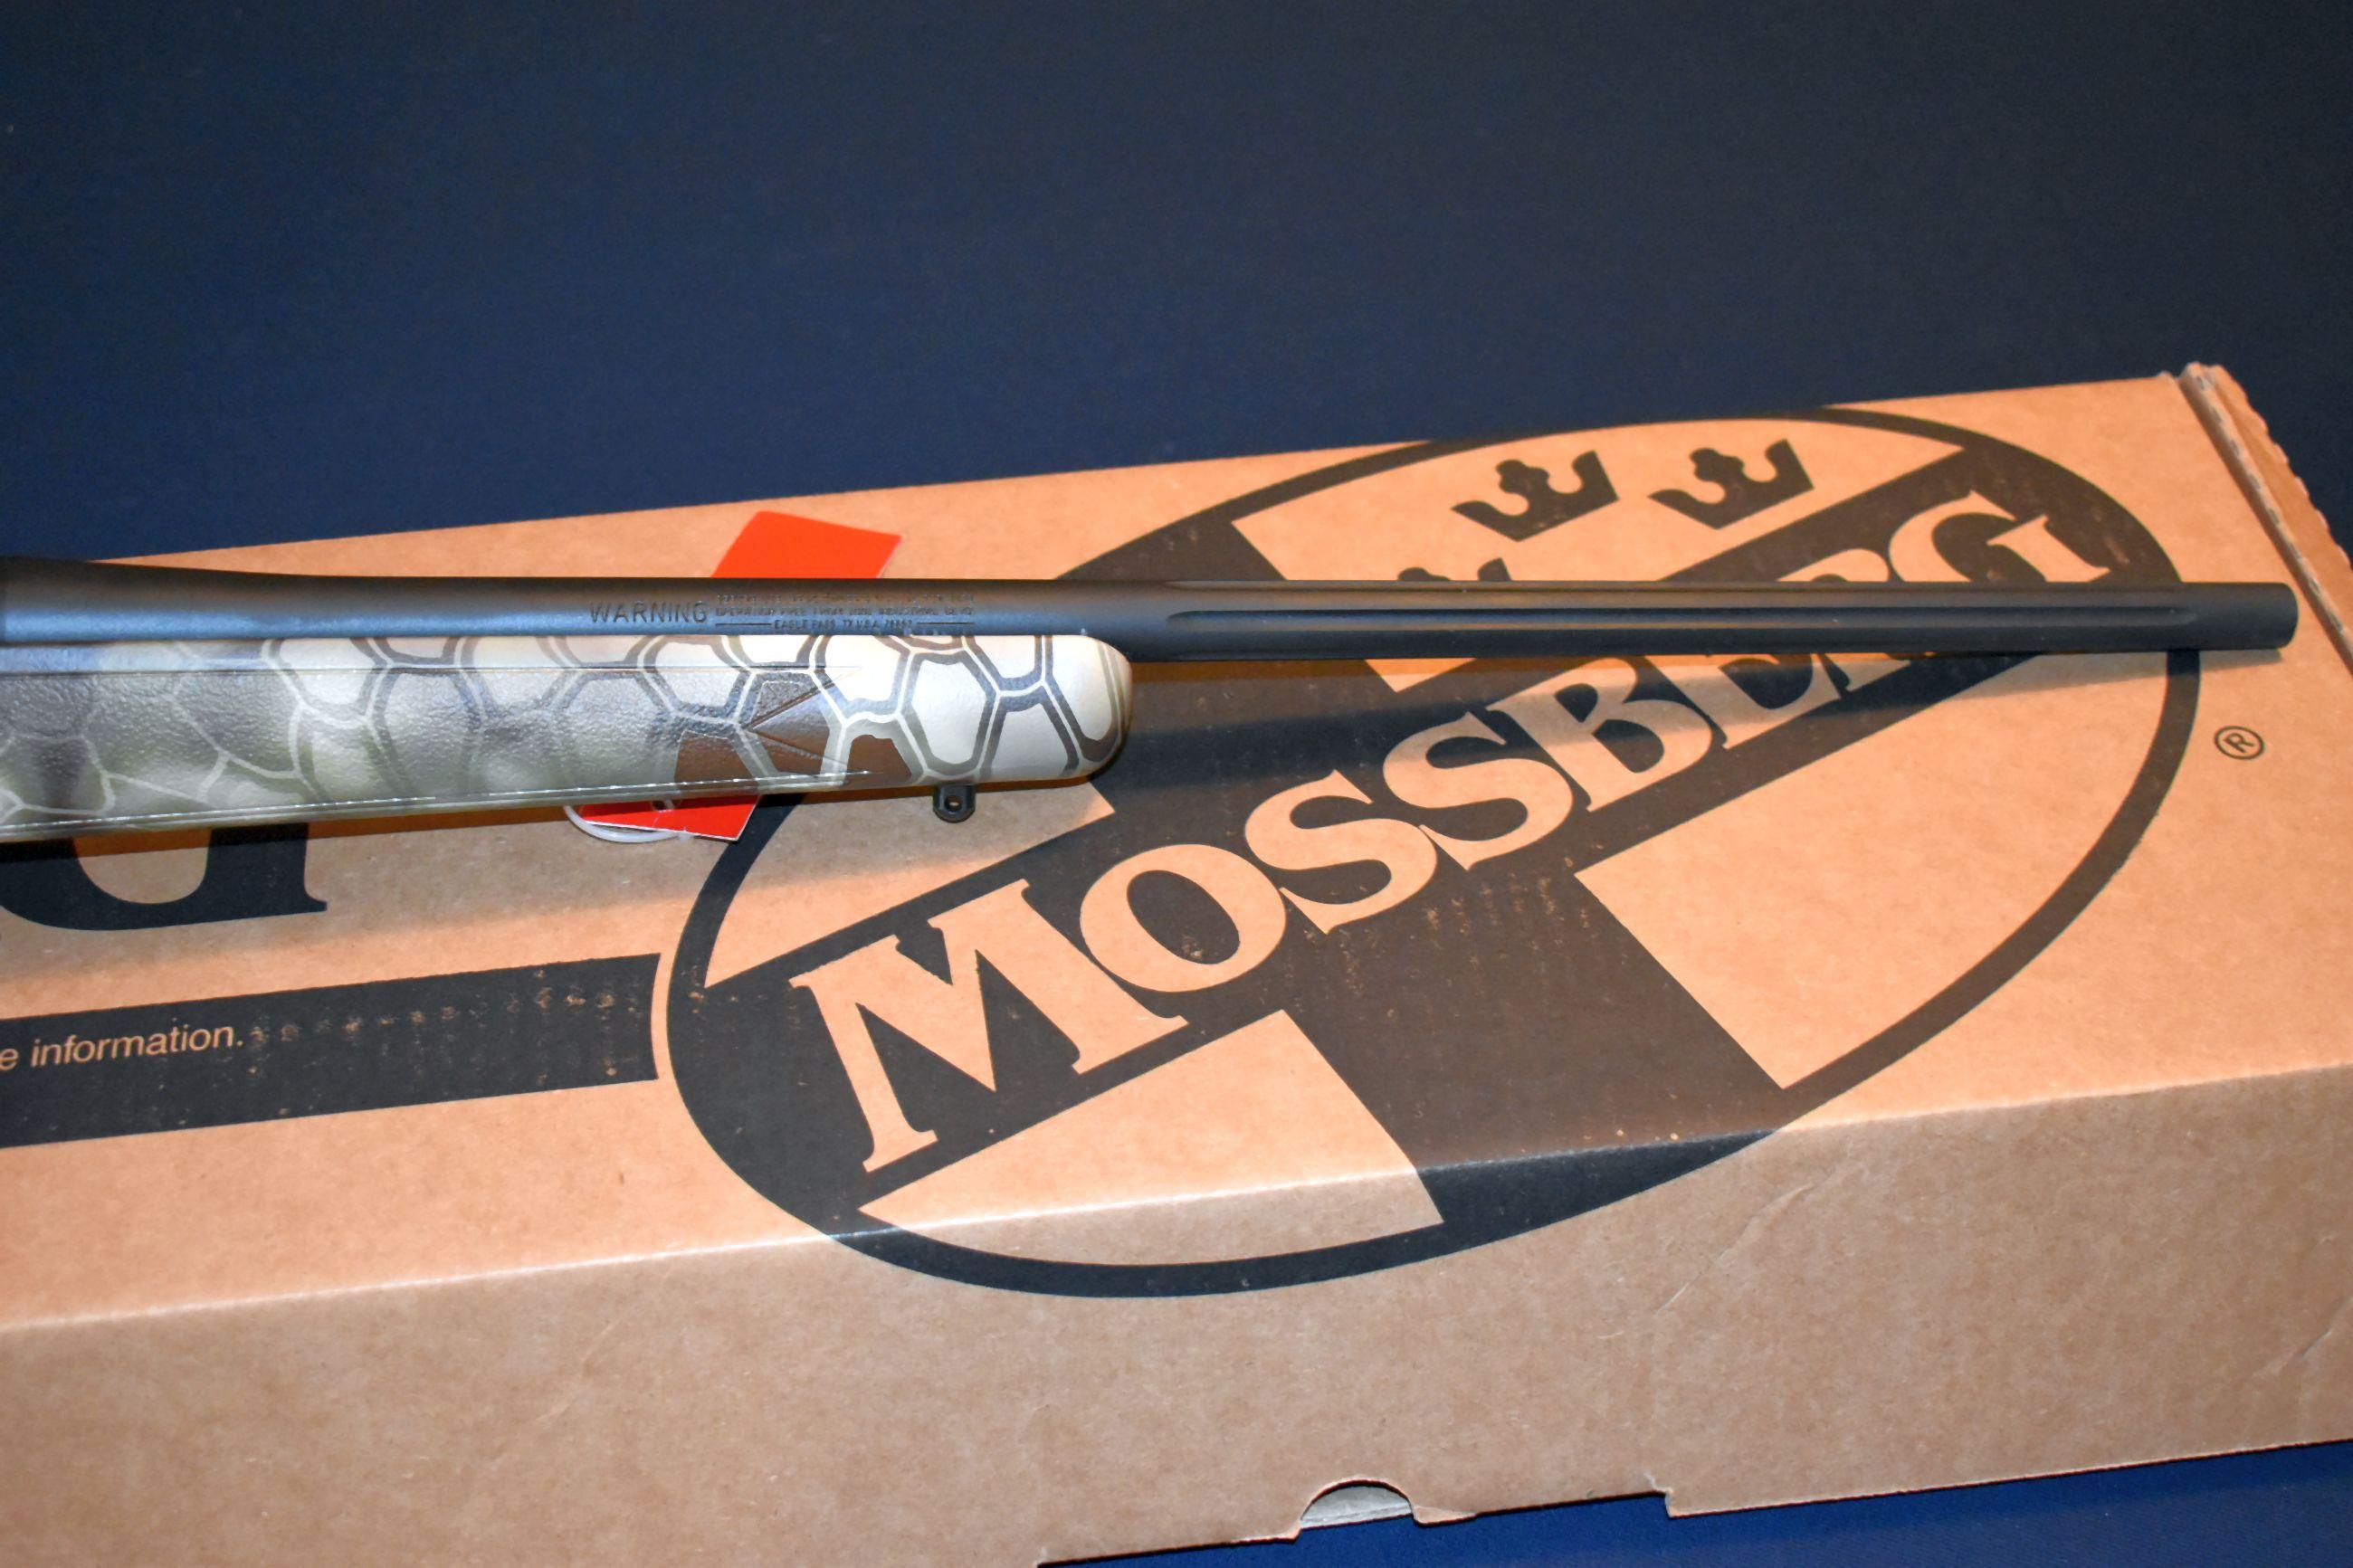 Mossberg Patriot Bolt Action Rifle, 300 Win. Mag., Scope Mounts, Synthetic Camo Stock, New In Box Un